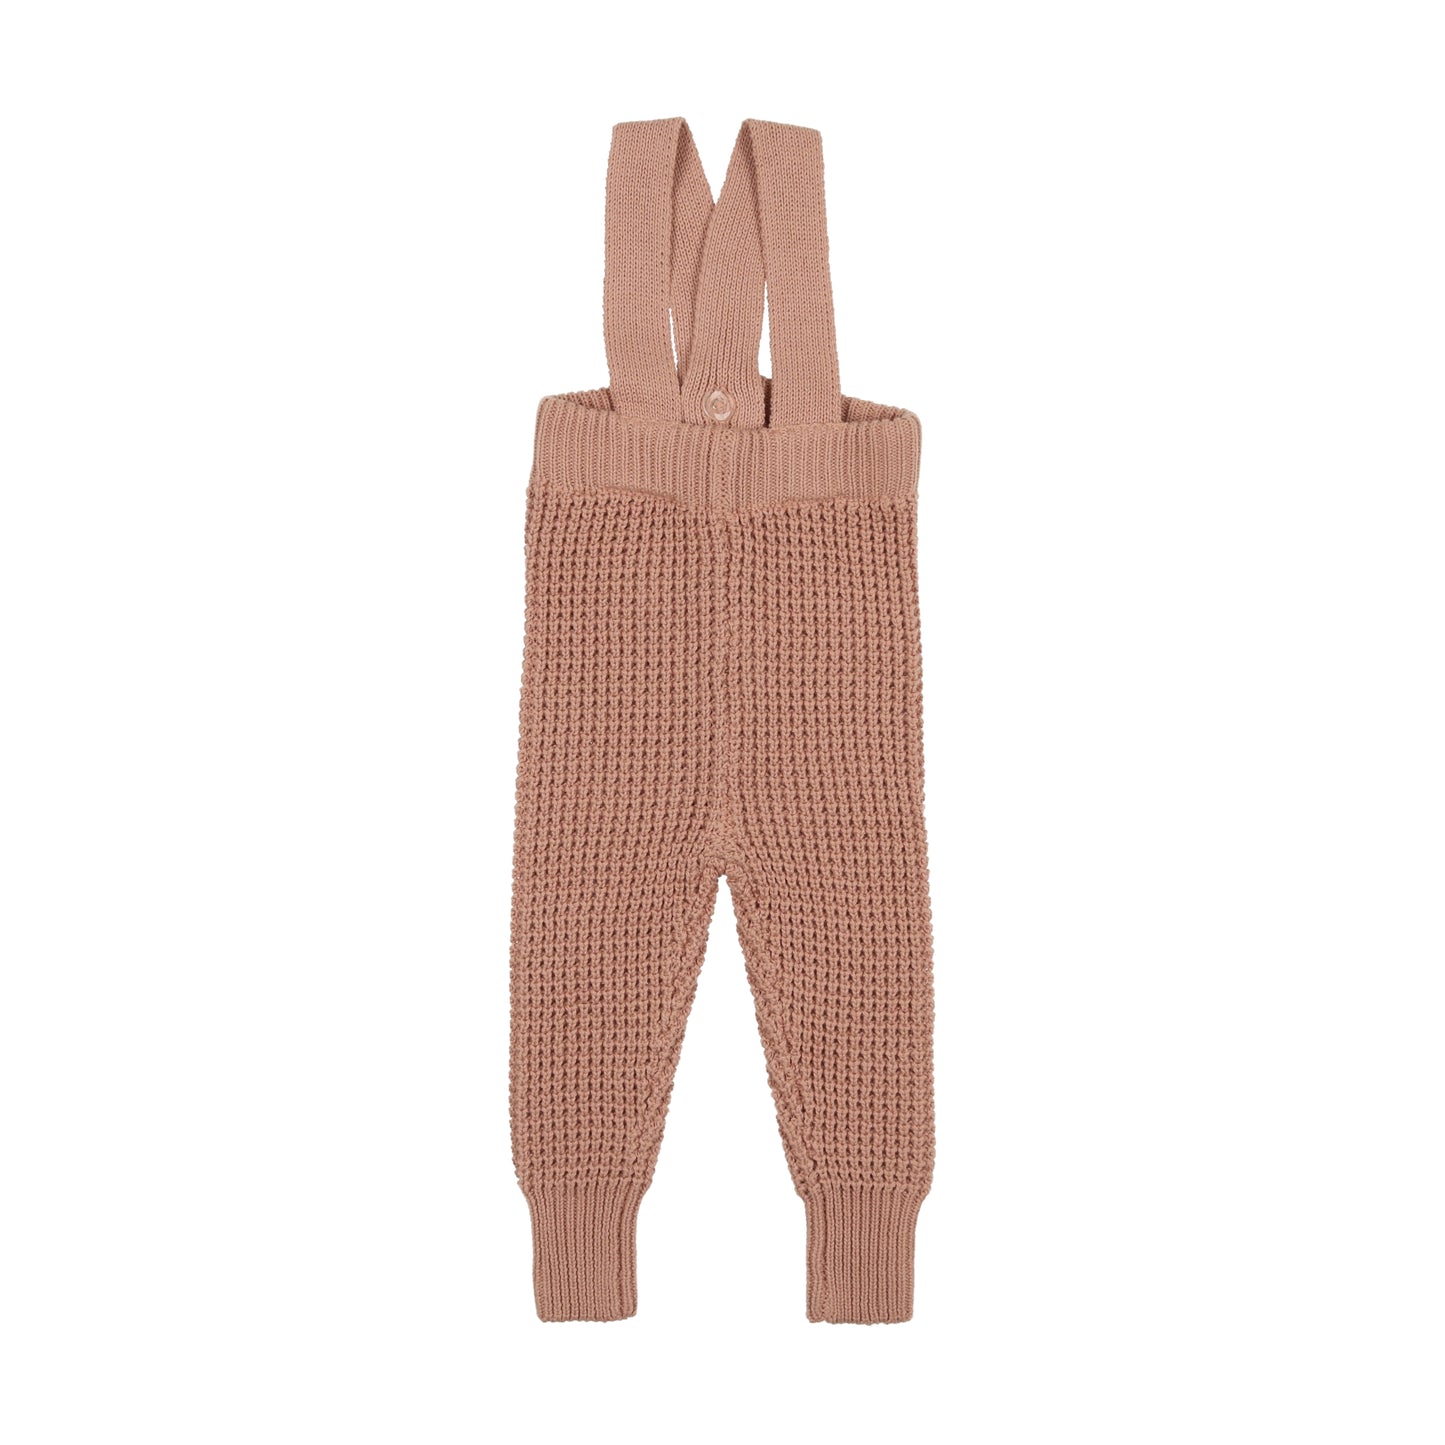 ANALOGIE DUSTY PINK WAFFLE KNIT LONG OVERALLS